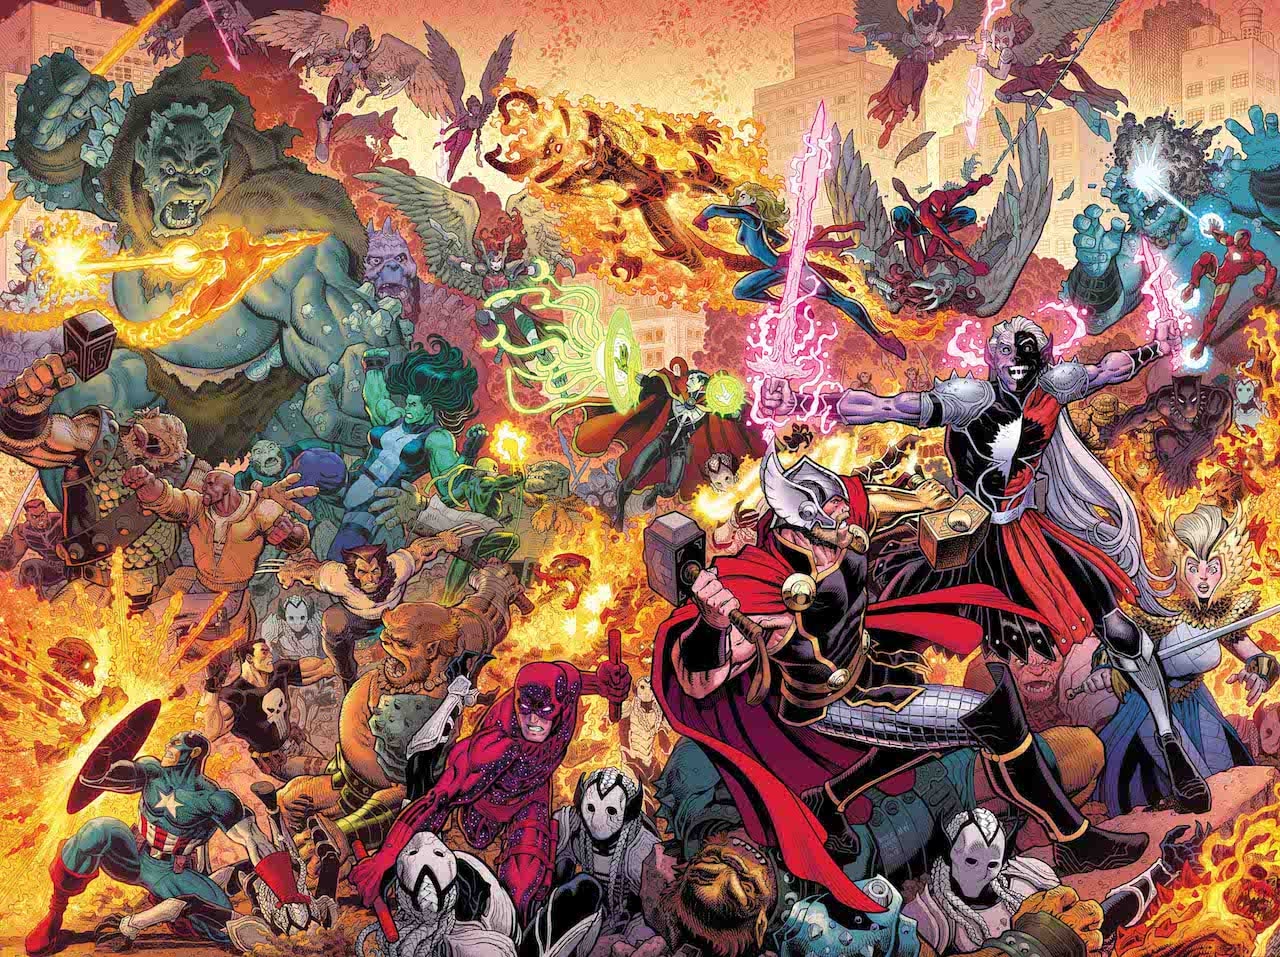 The war in 'War of the Realms' escalates due to a meal